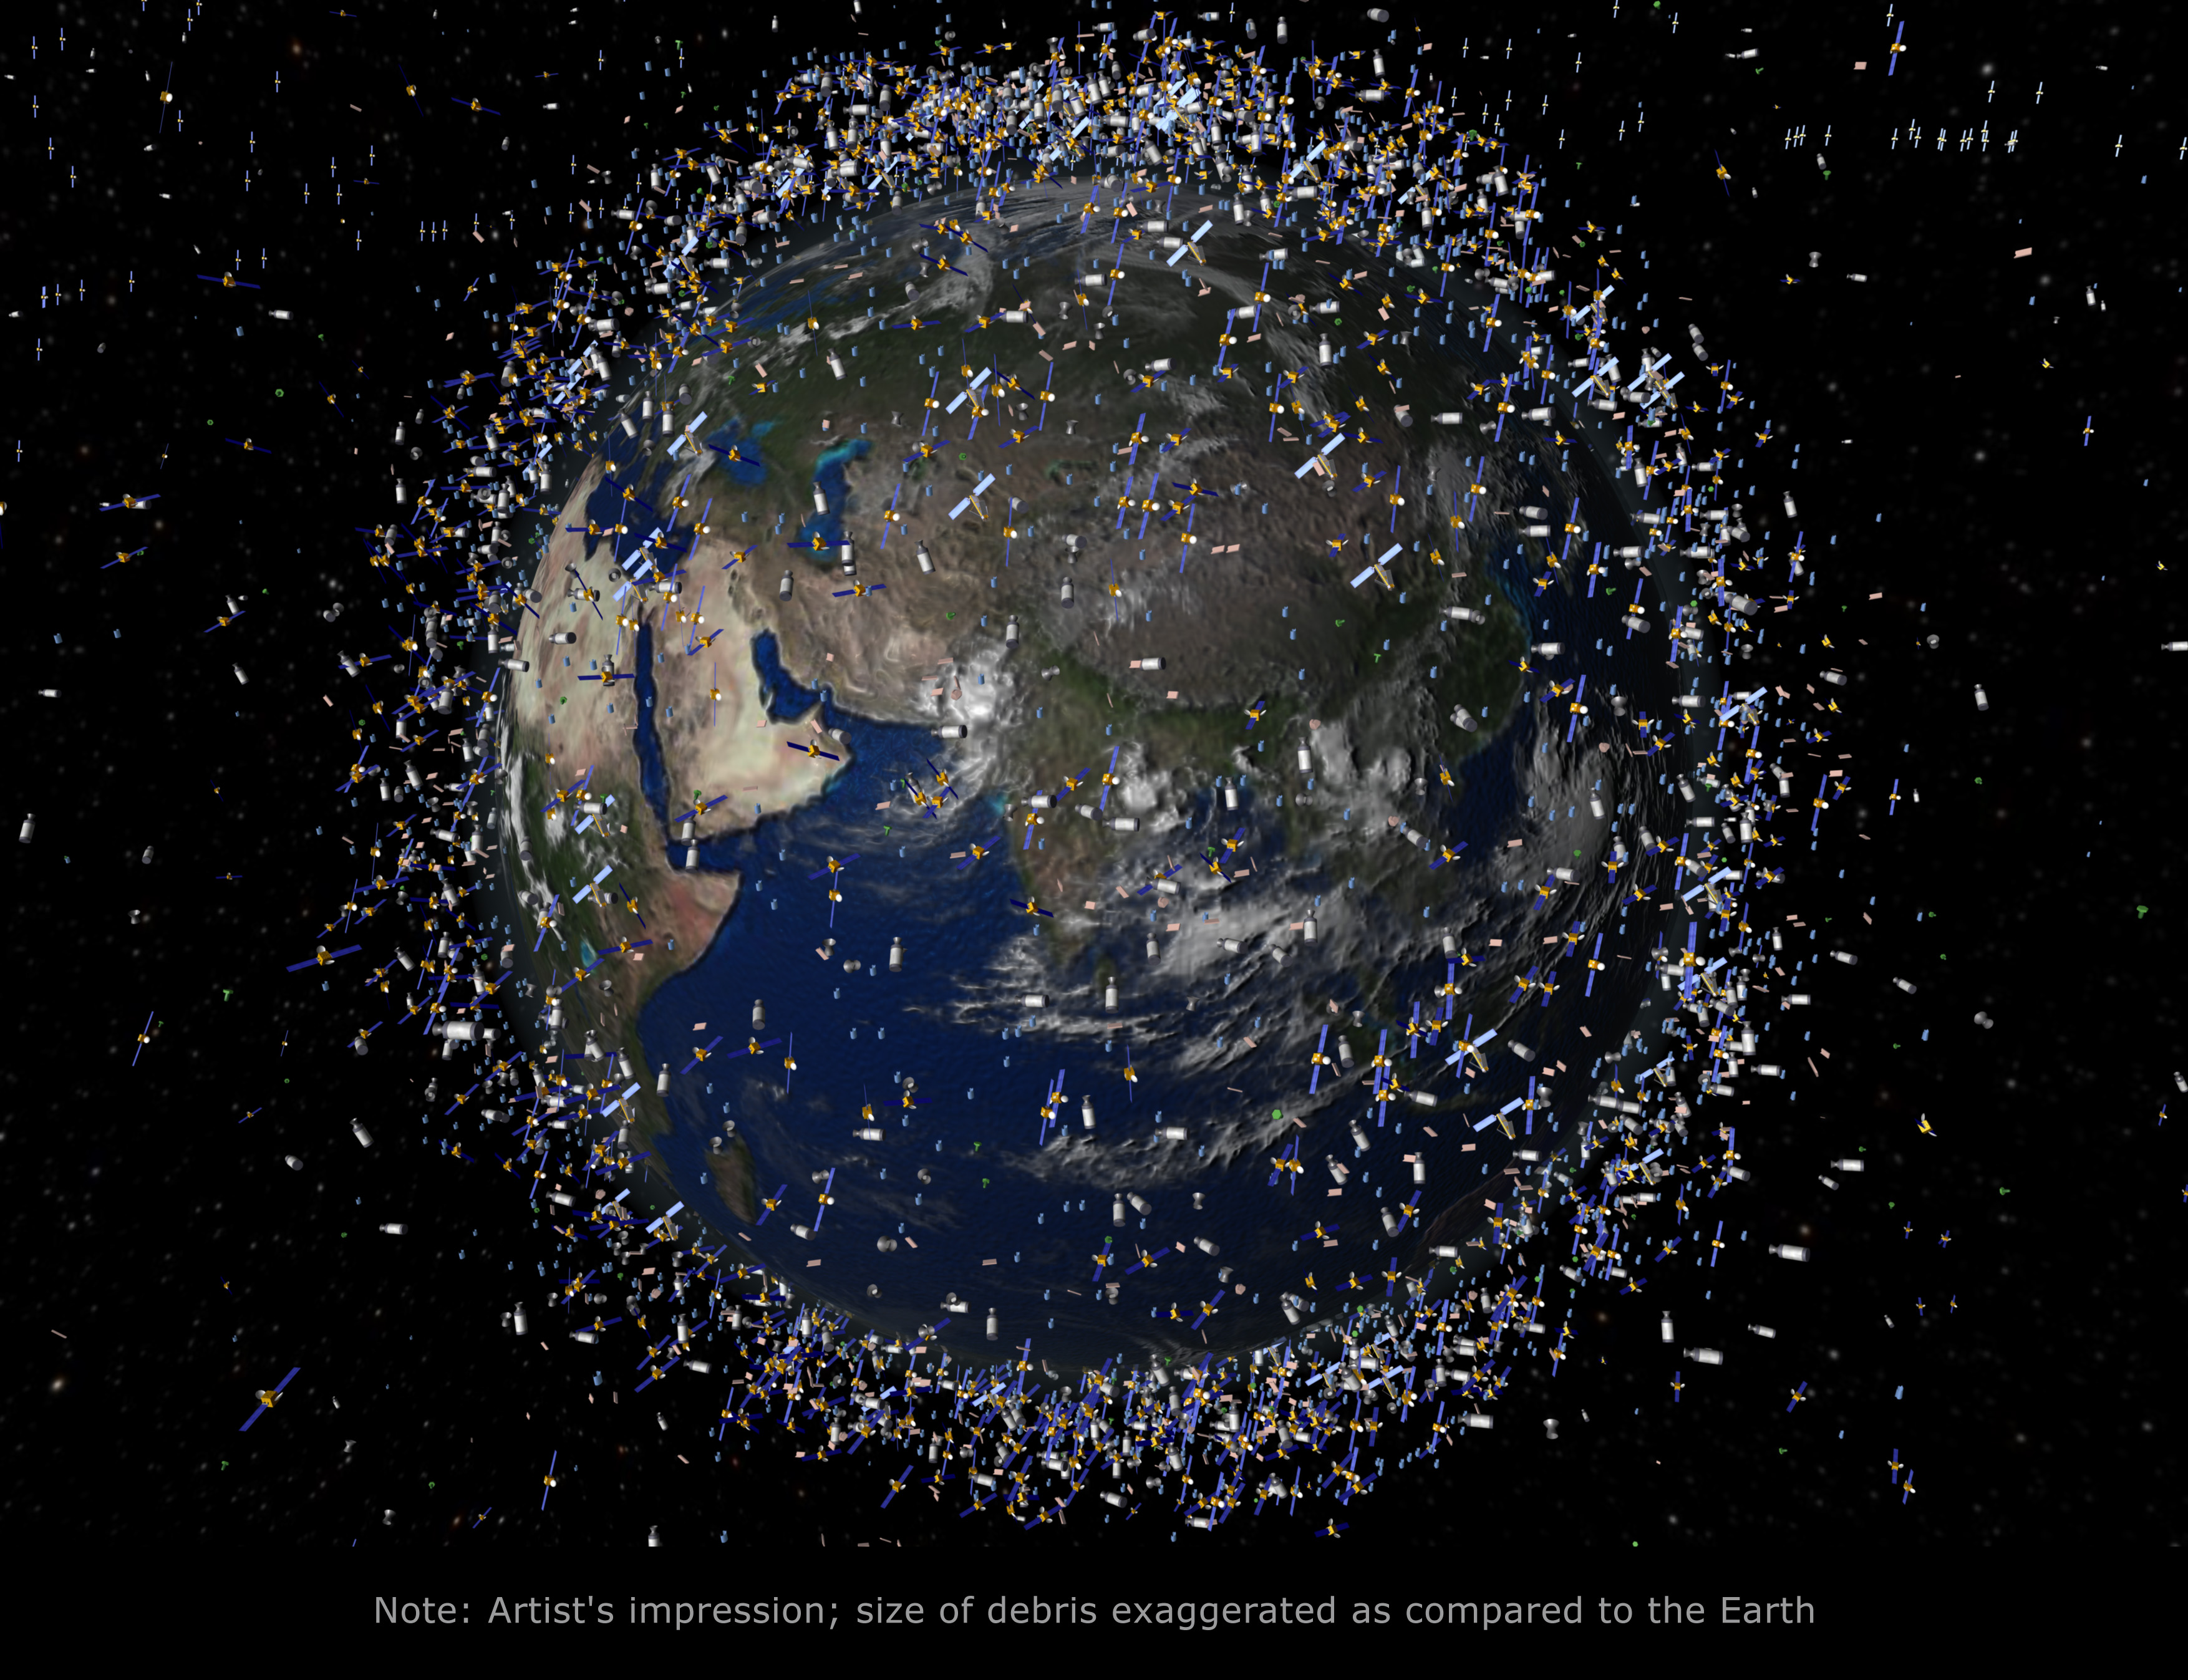 US, China Will Meet This Year to Talk Space Debris